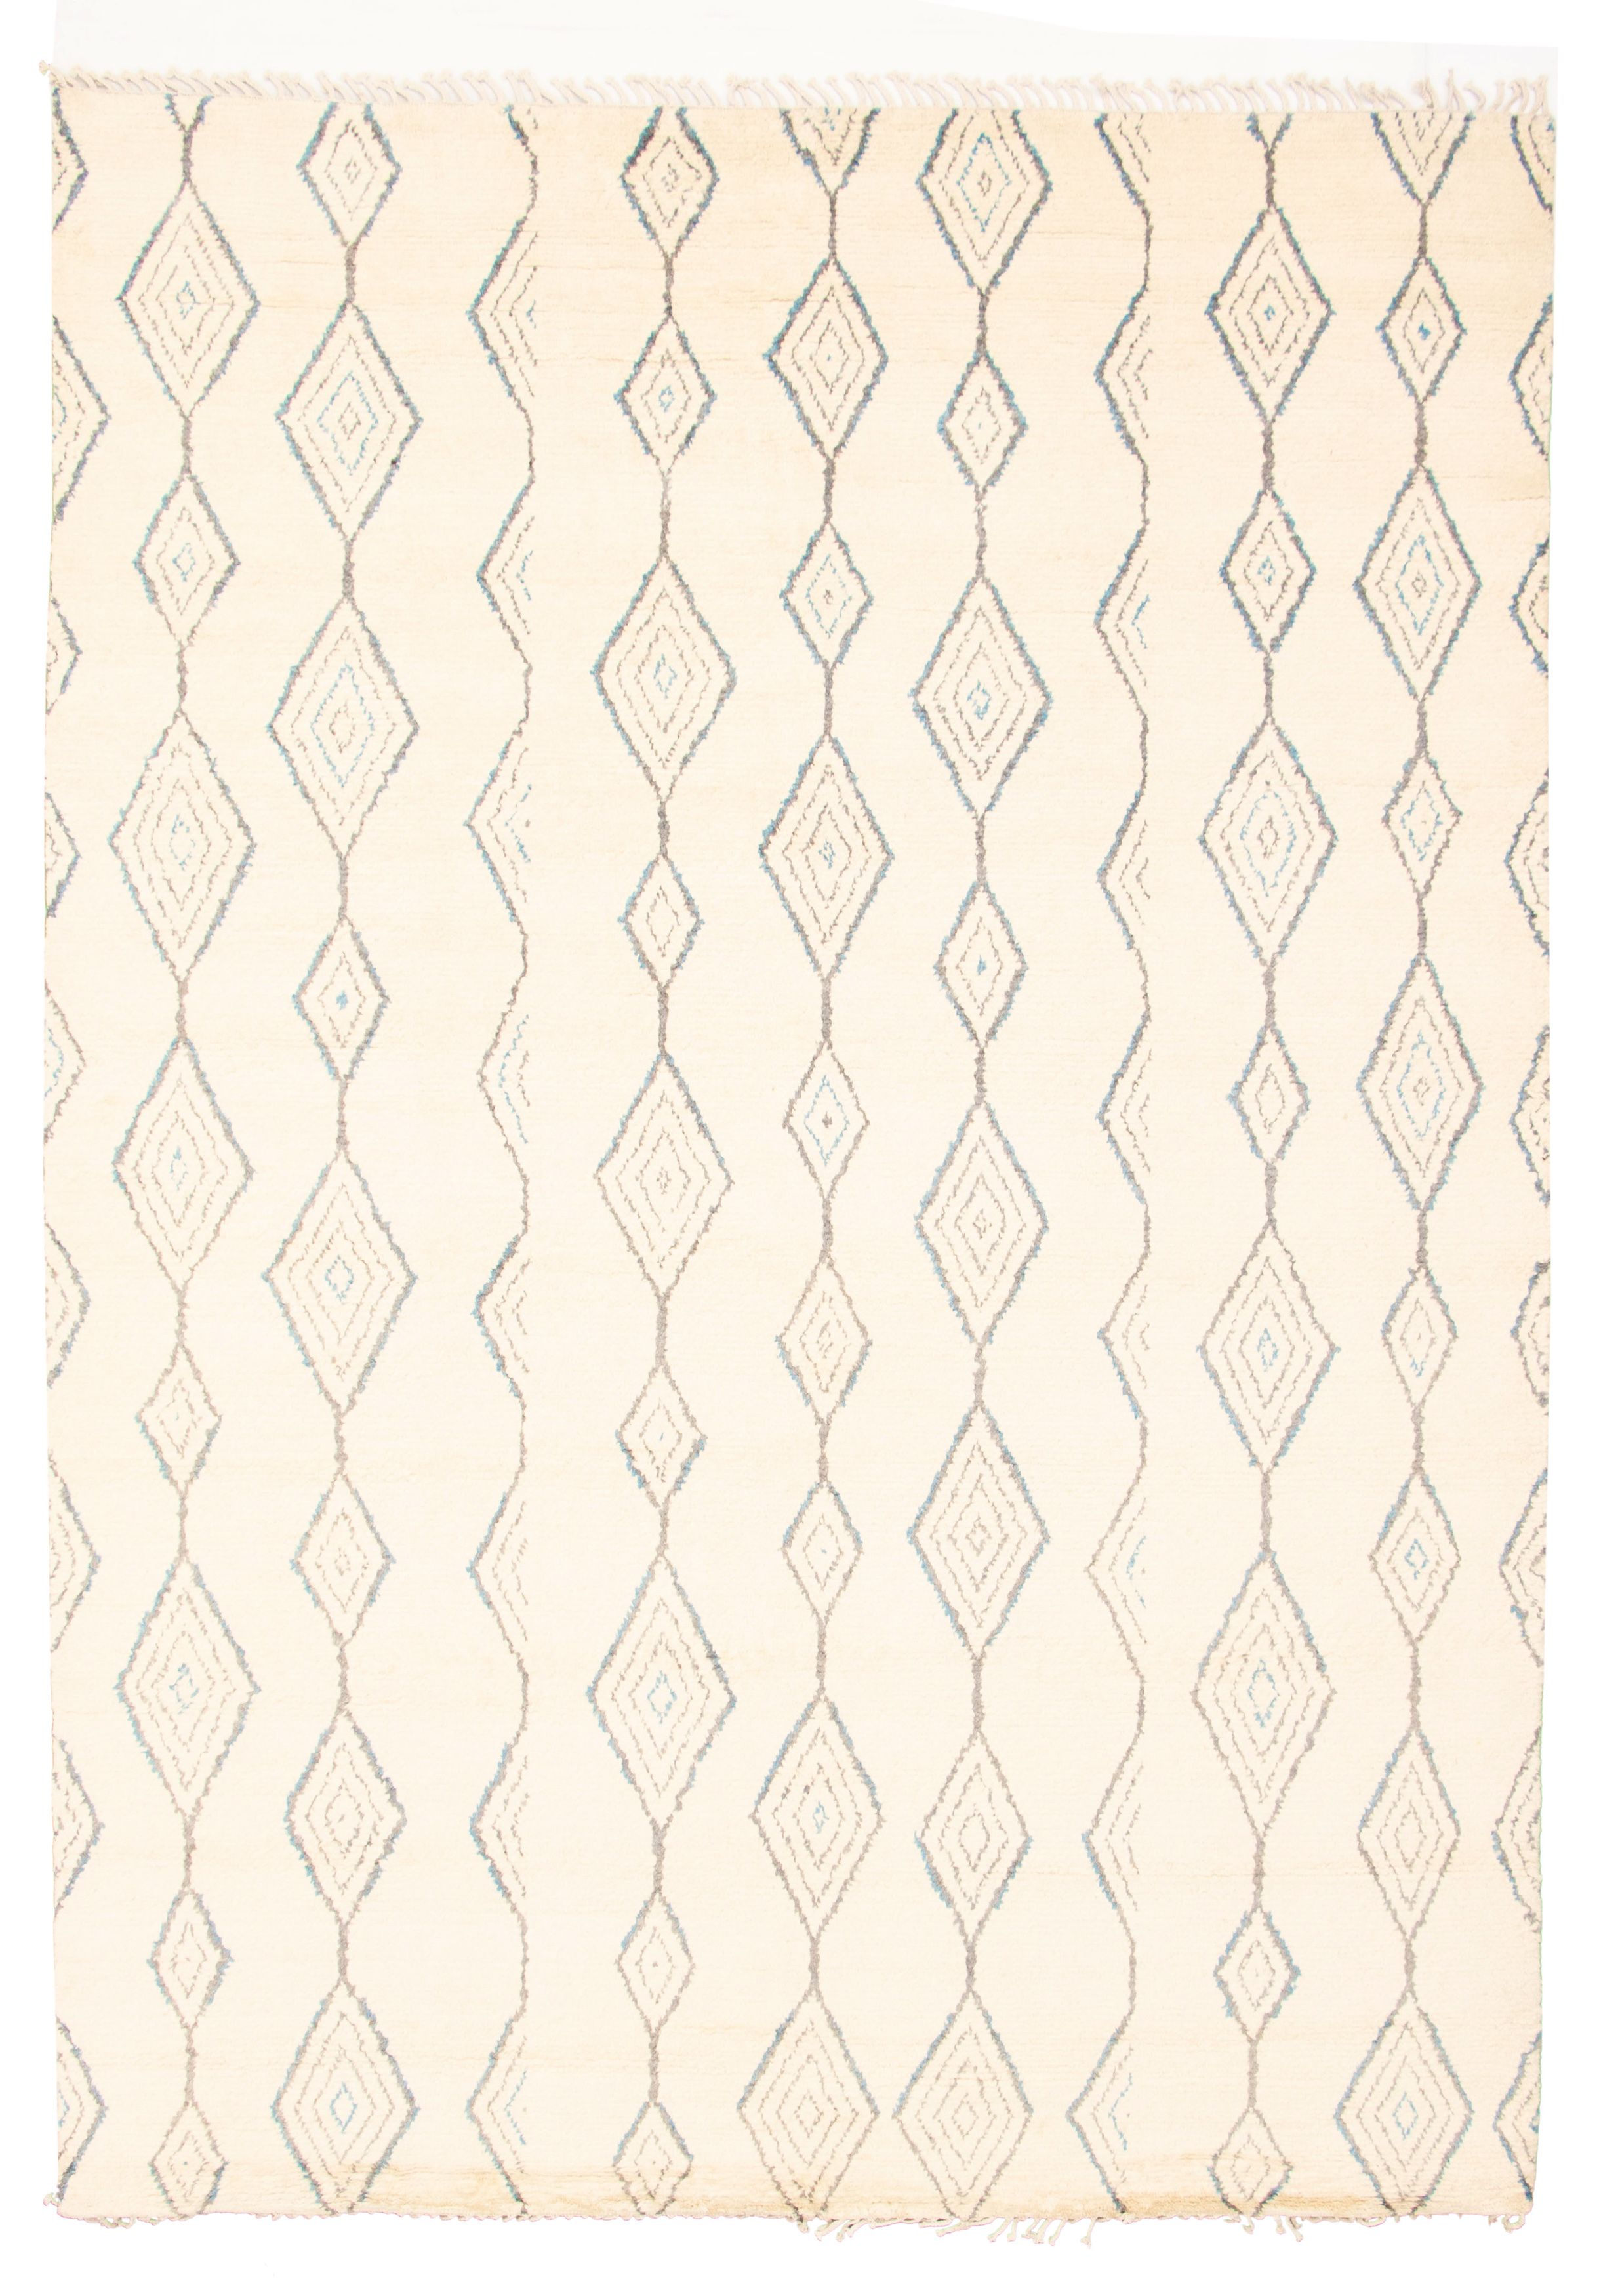 Hand-knotted Marrakech Cream Wool Rug 8'10" x 12'6"  Size: 8'10" x 12'6"  